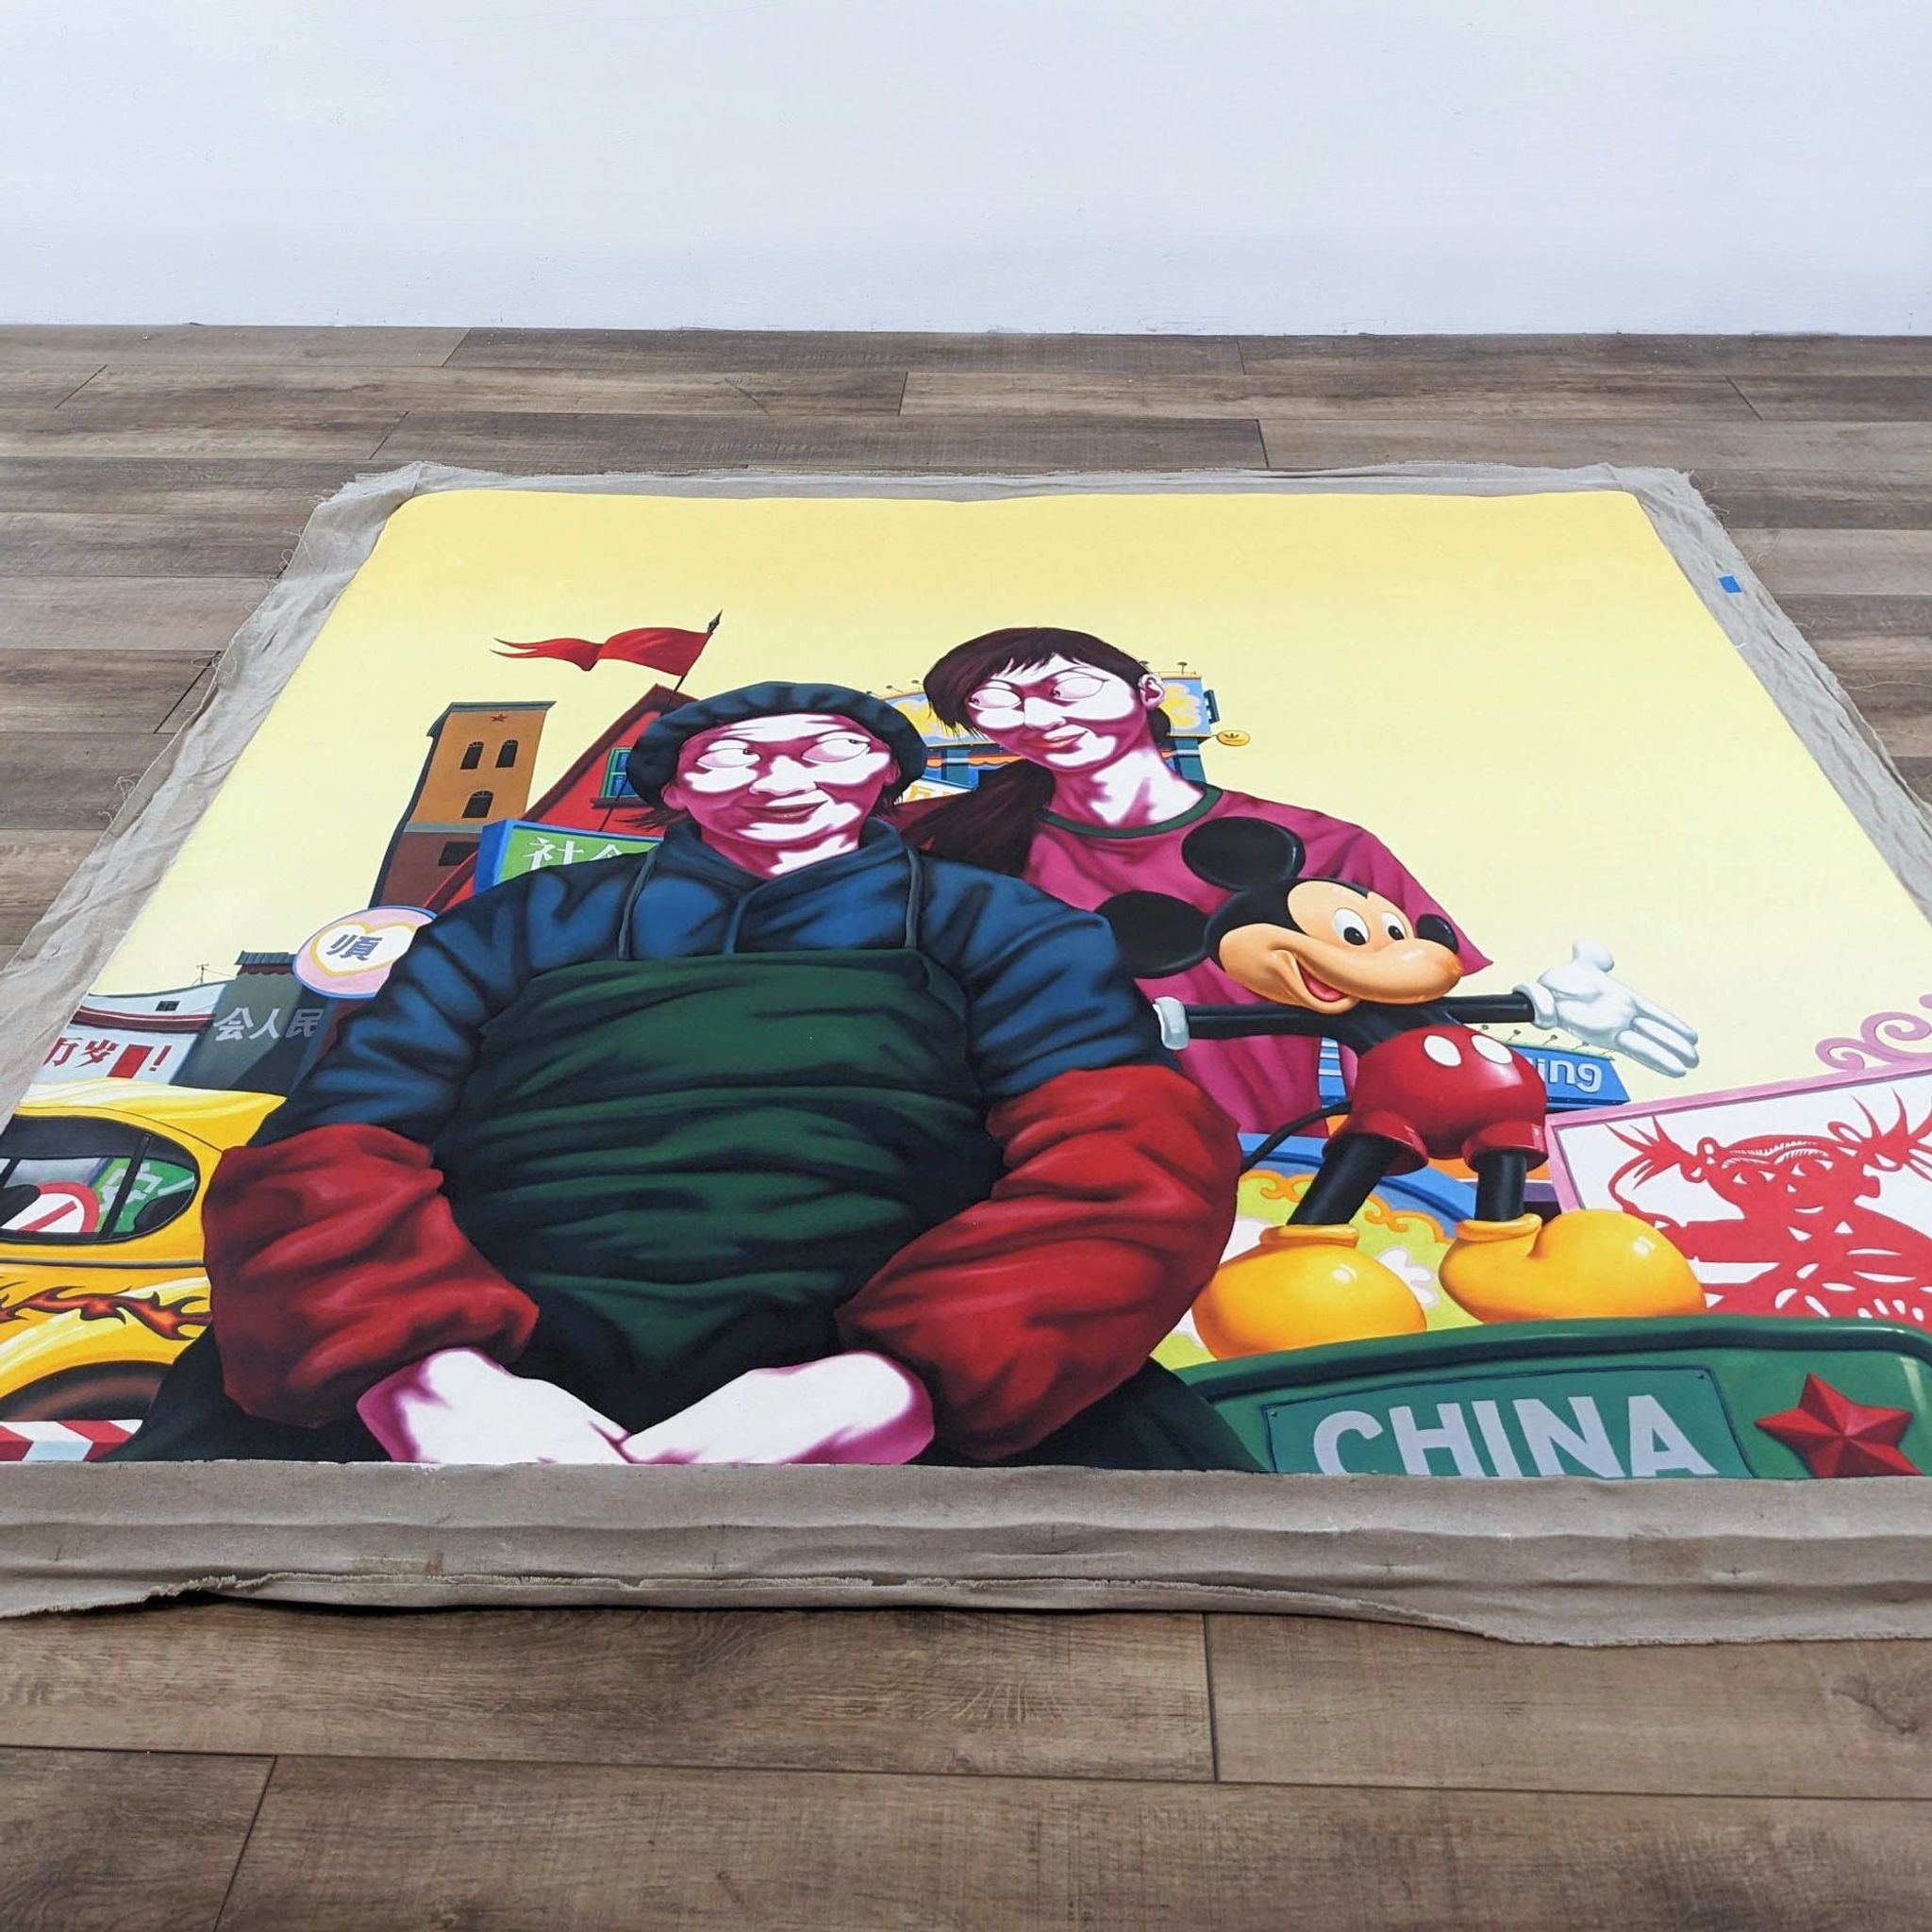 Alt text 1: Large contemporary painting by Zhao Bo, featuring a colorful depiction of two people and Mickey Mouse, dated 2008 by Reperch, unframed.